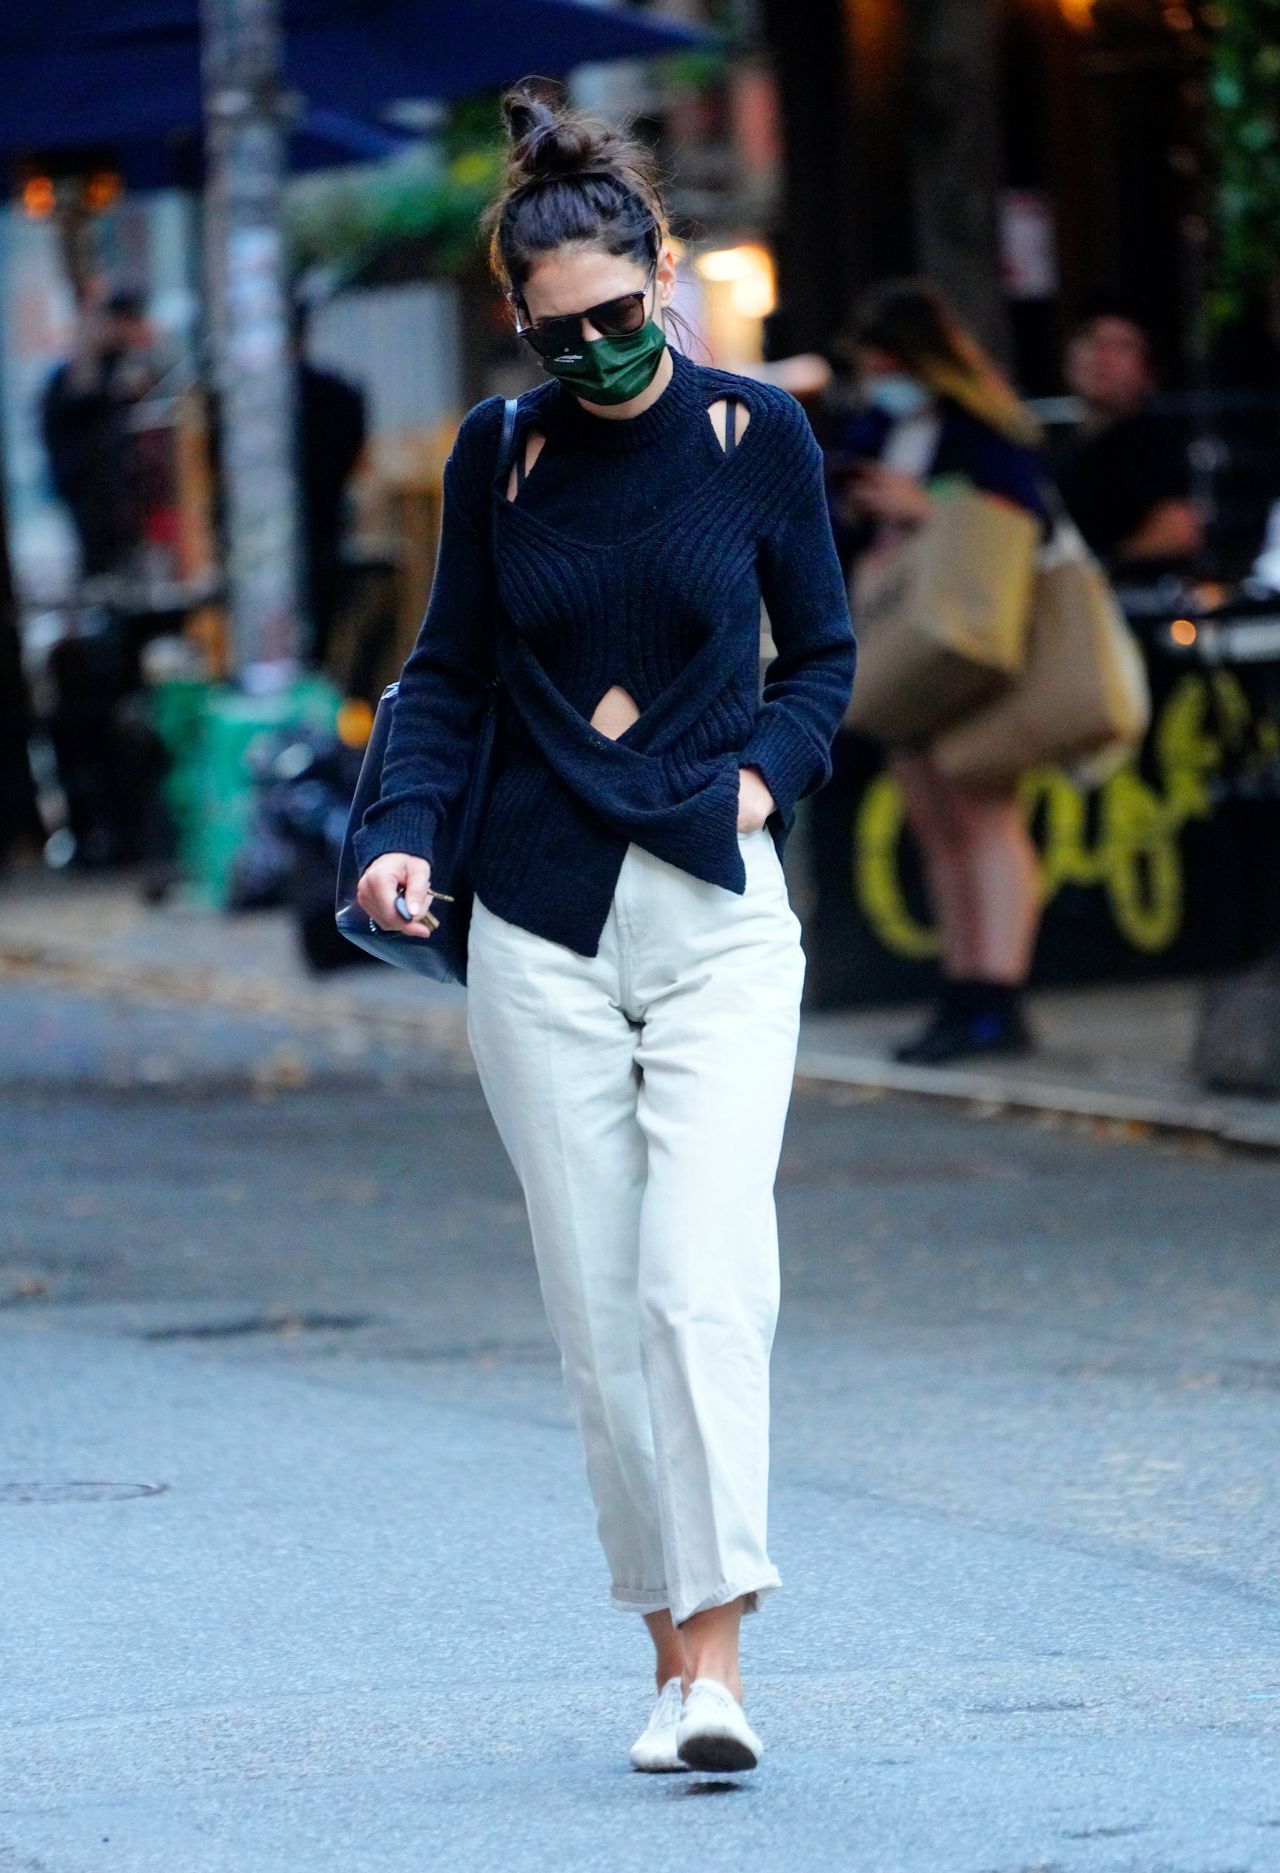 katie-holmes-out-in-new-york-10-15-2020-5.jpg